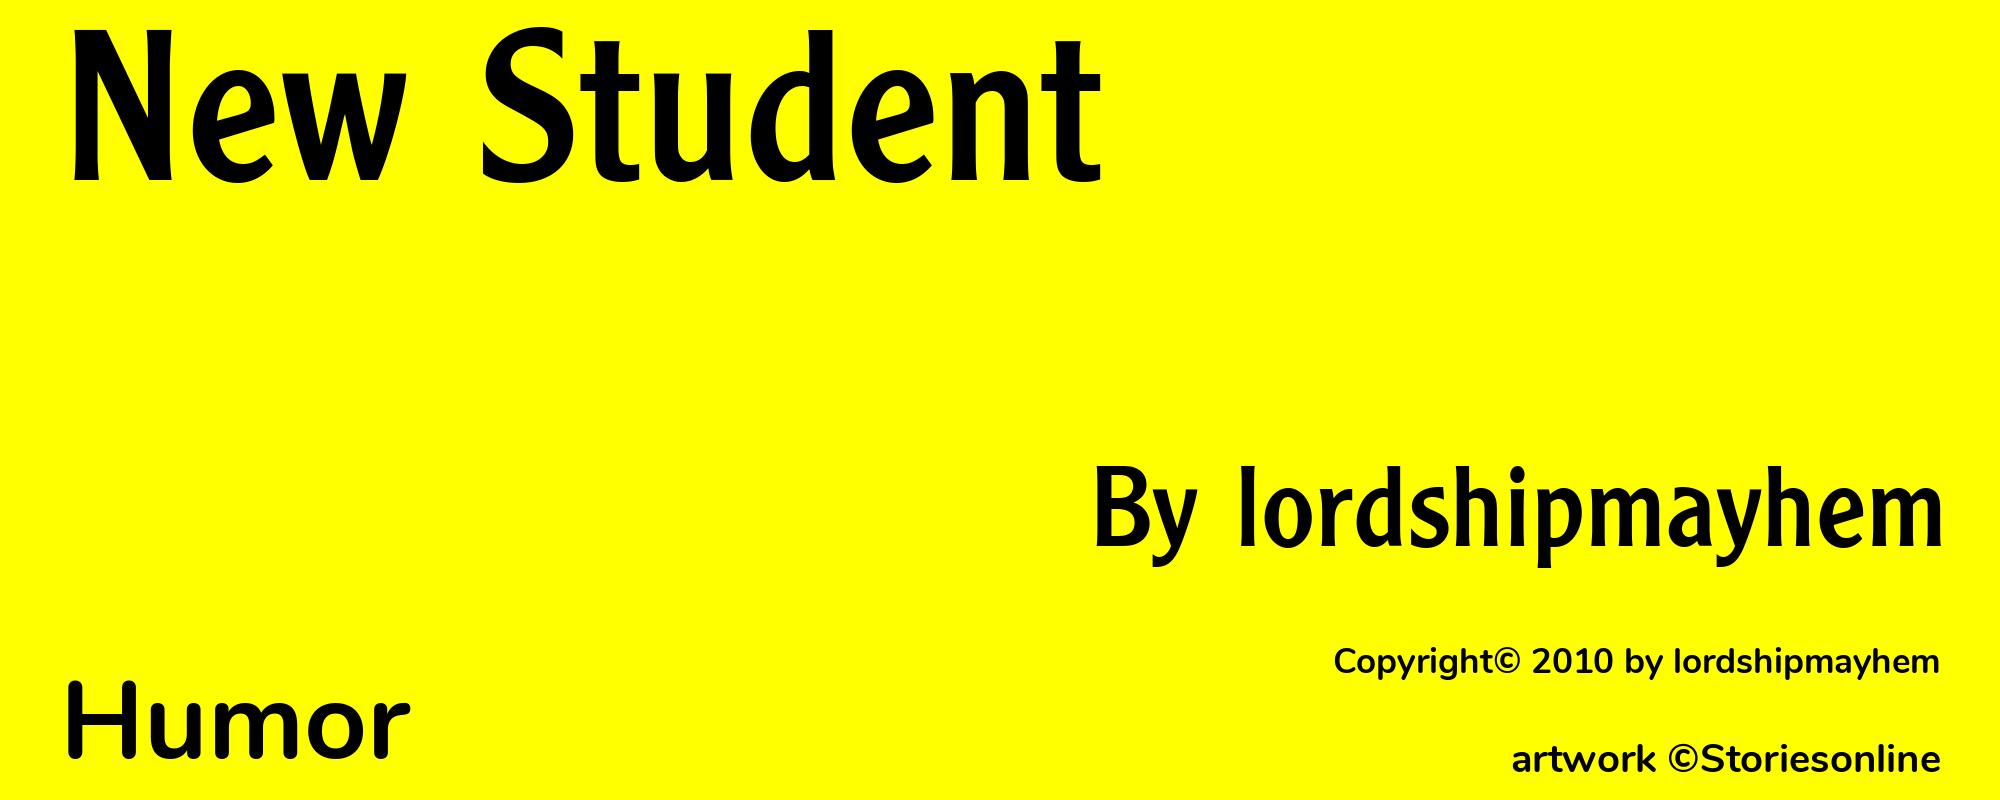 New Student - Cover